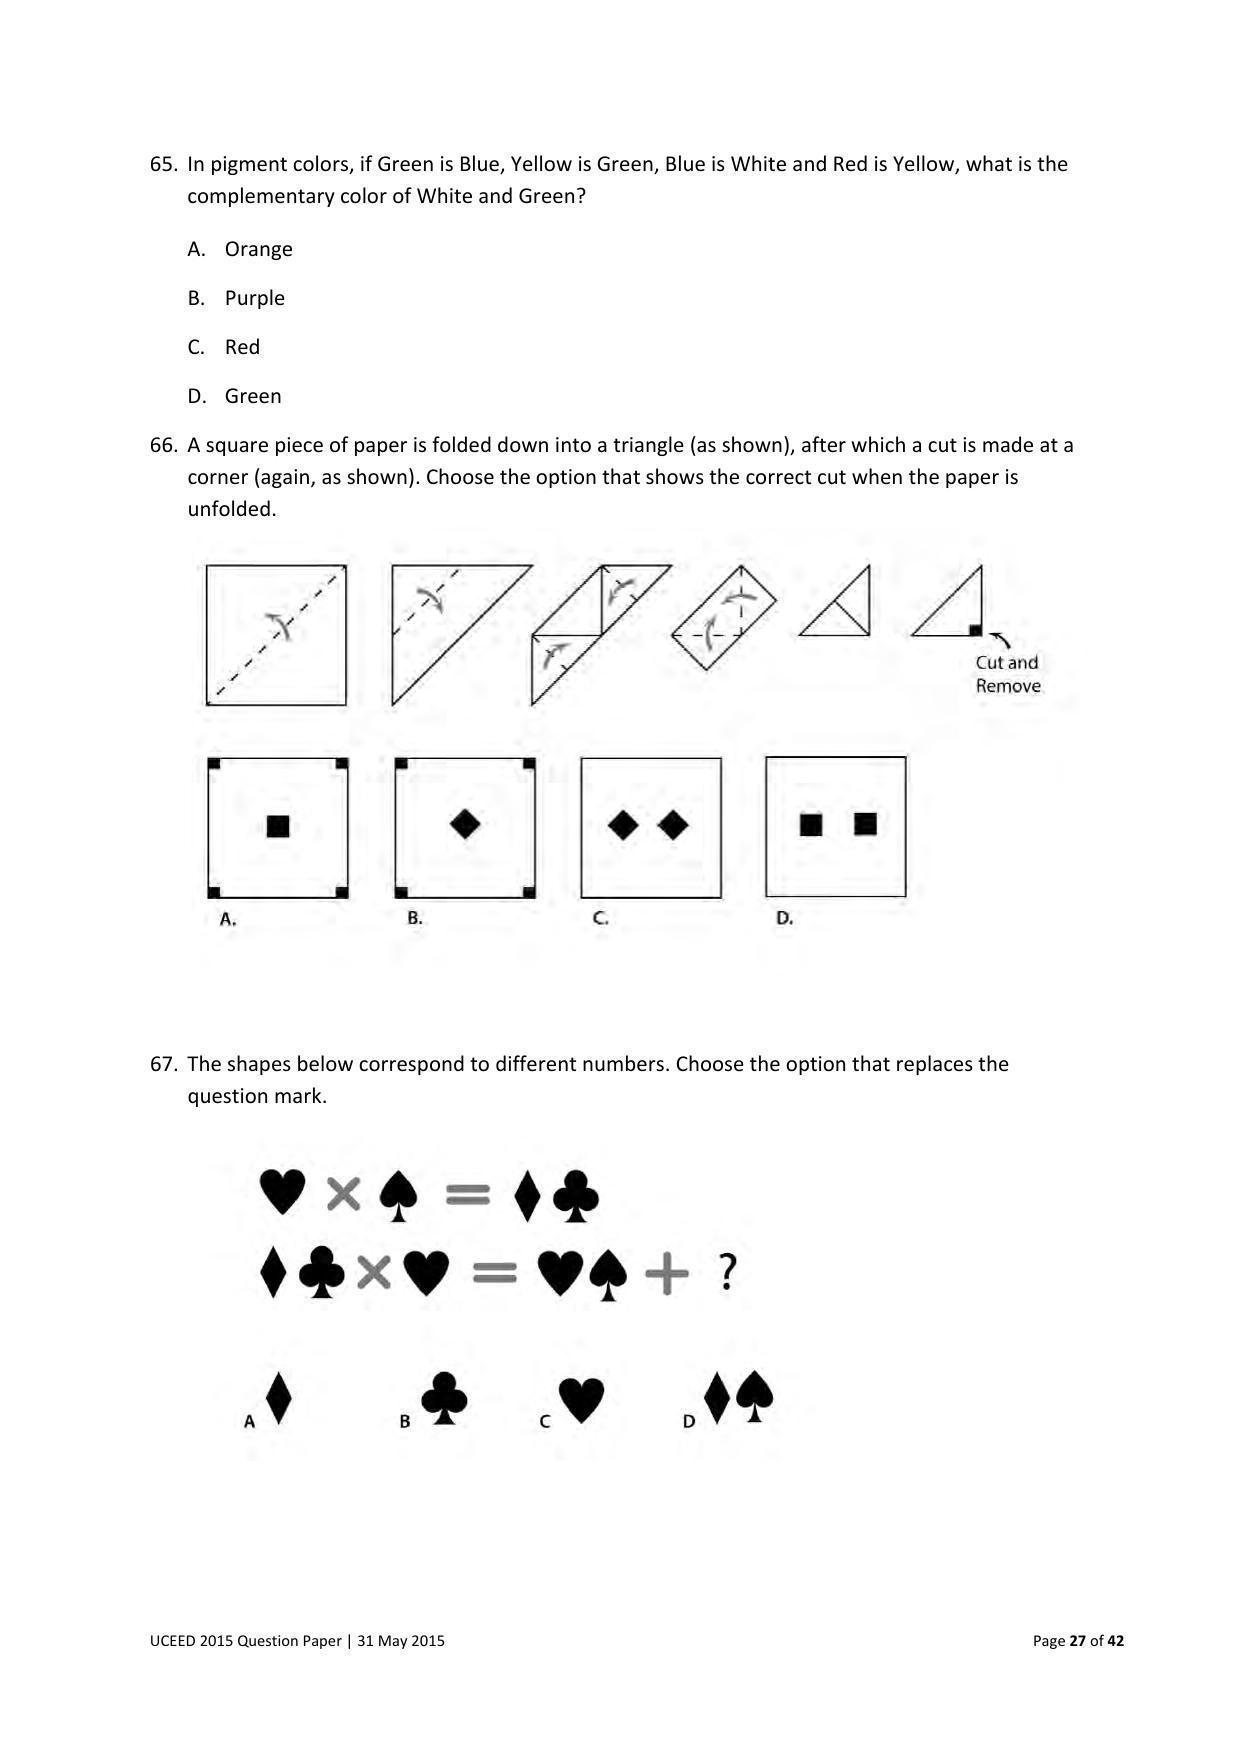 UCEED 2015 Question Paper - Page 27